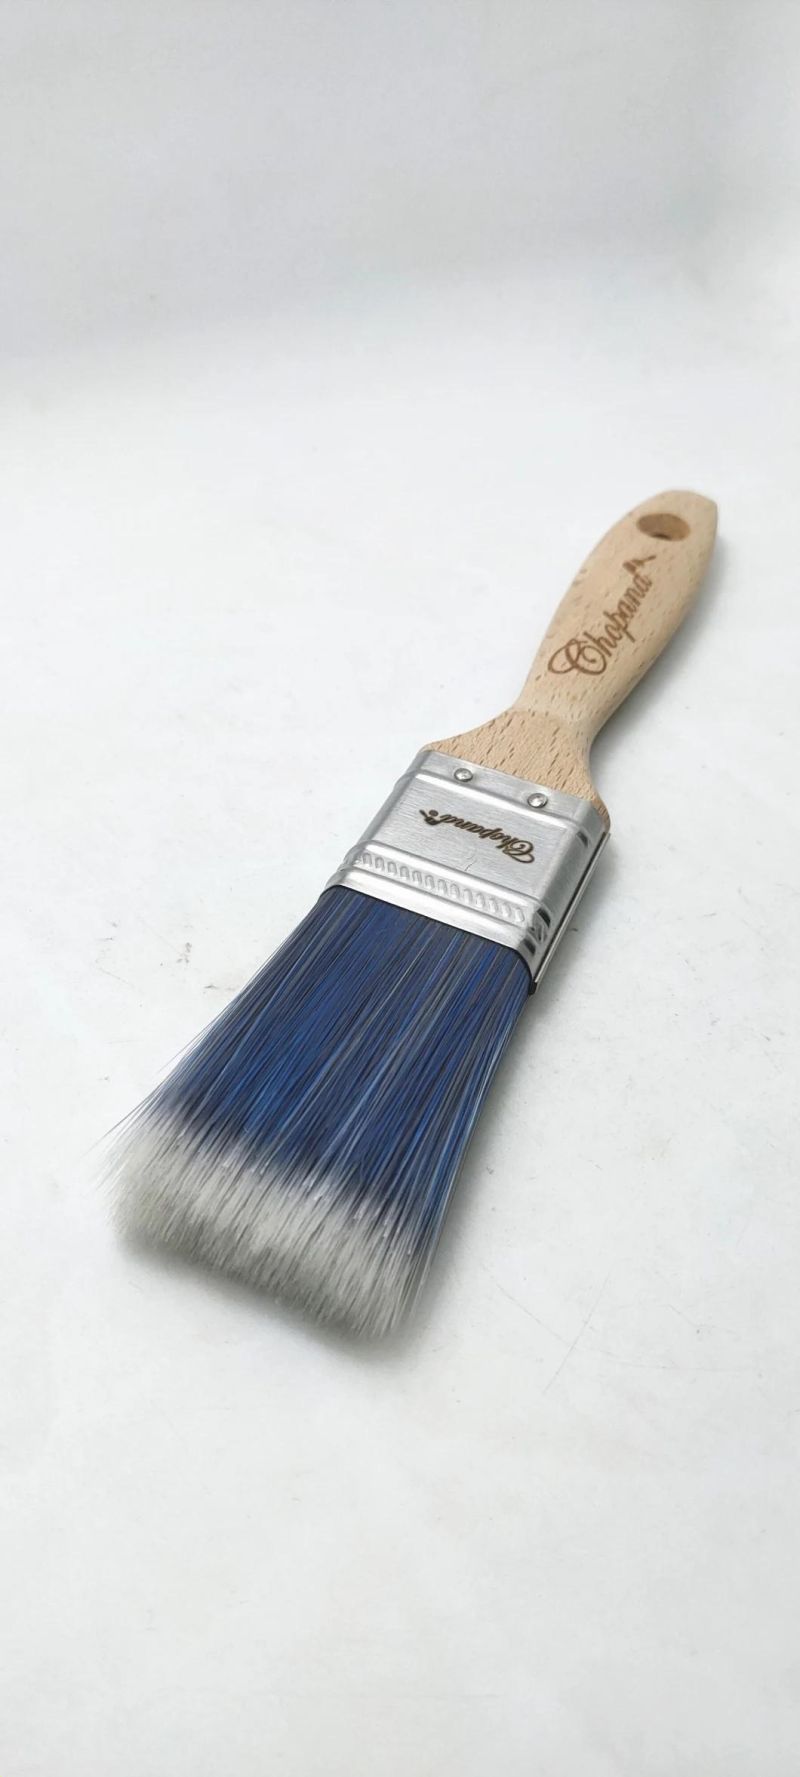 Powerful Good High Quality 2inch Hot Sale Wooden Handle Paint Brush